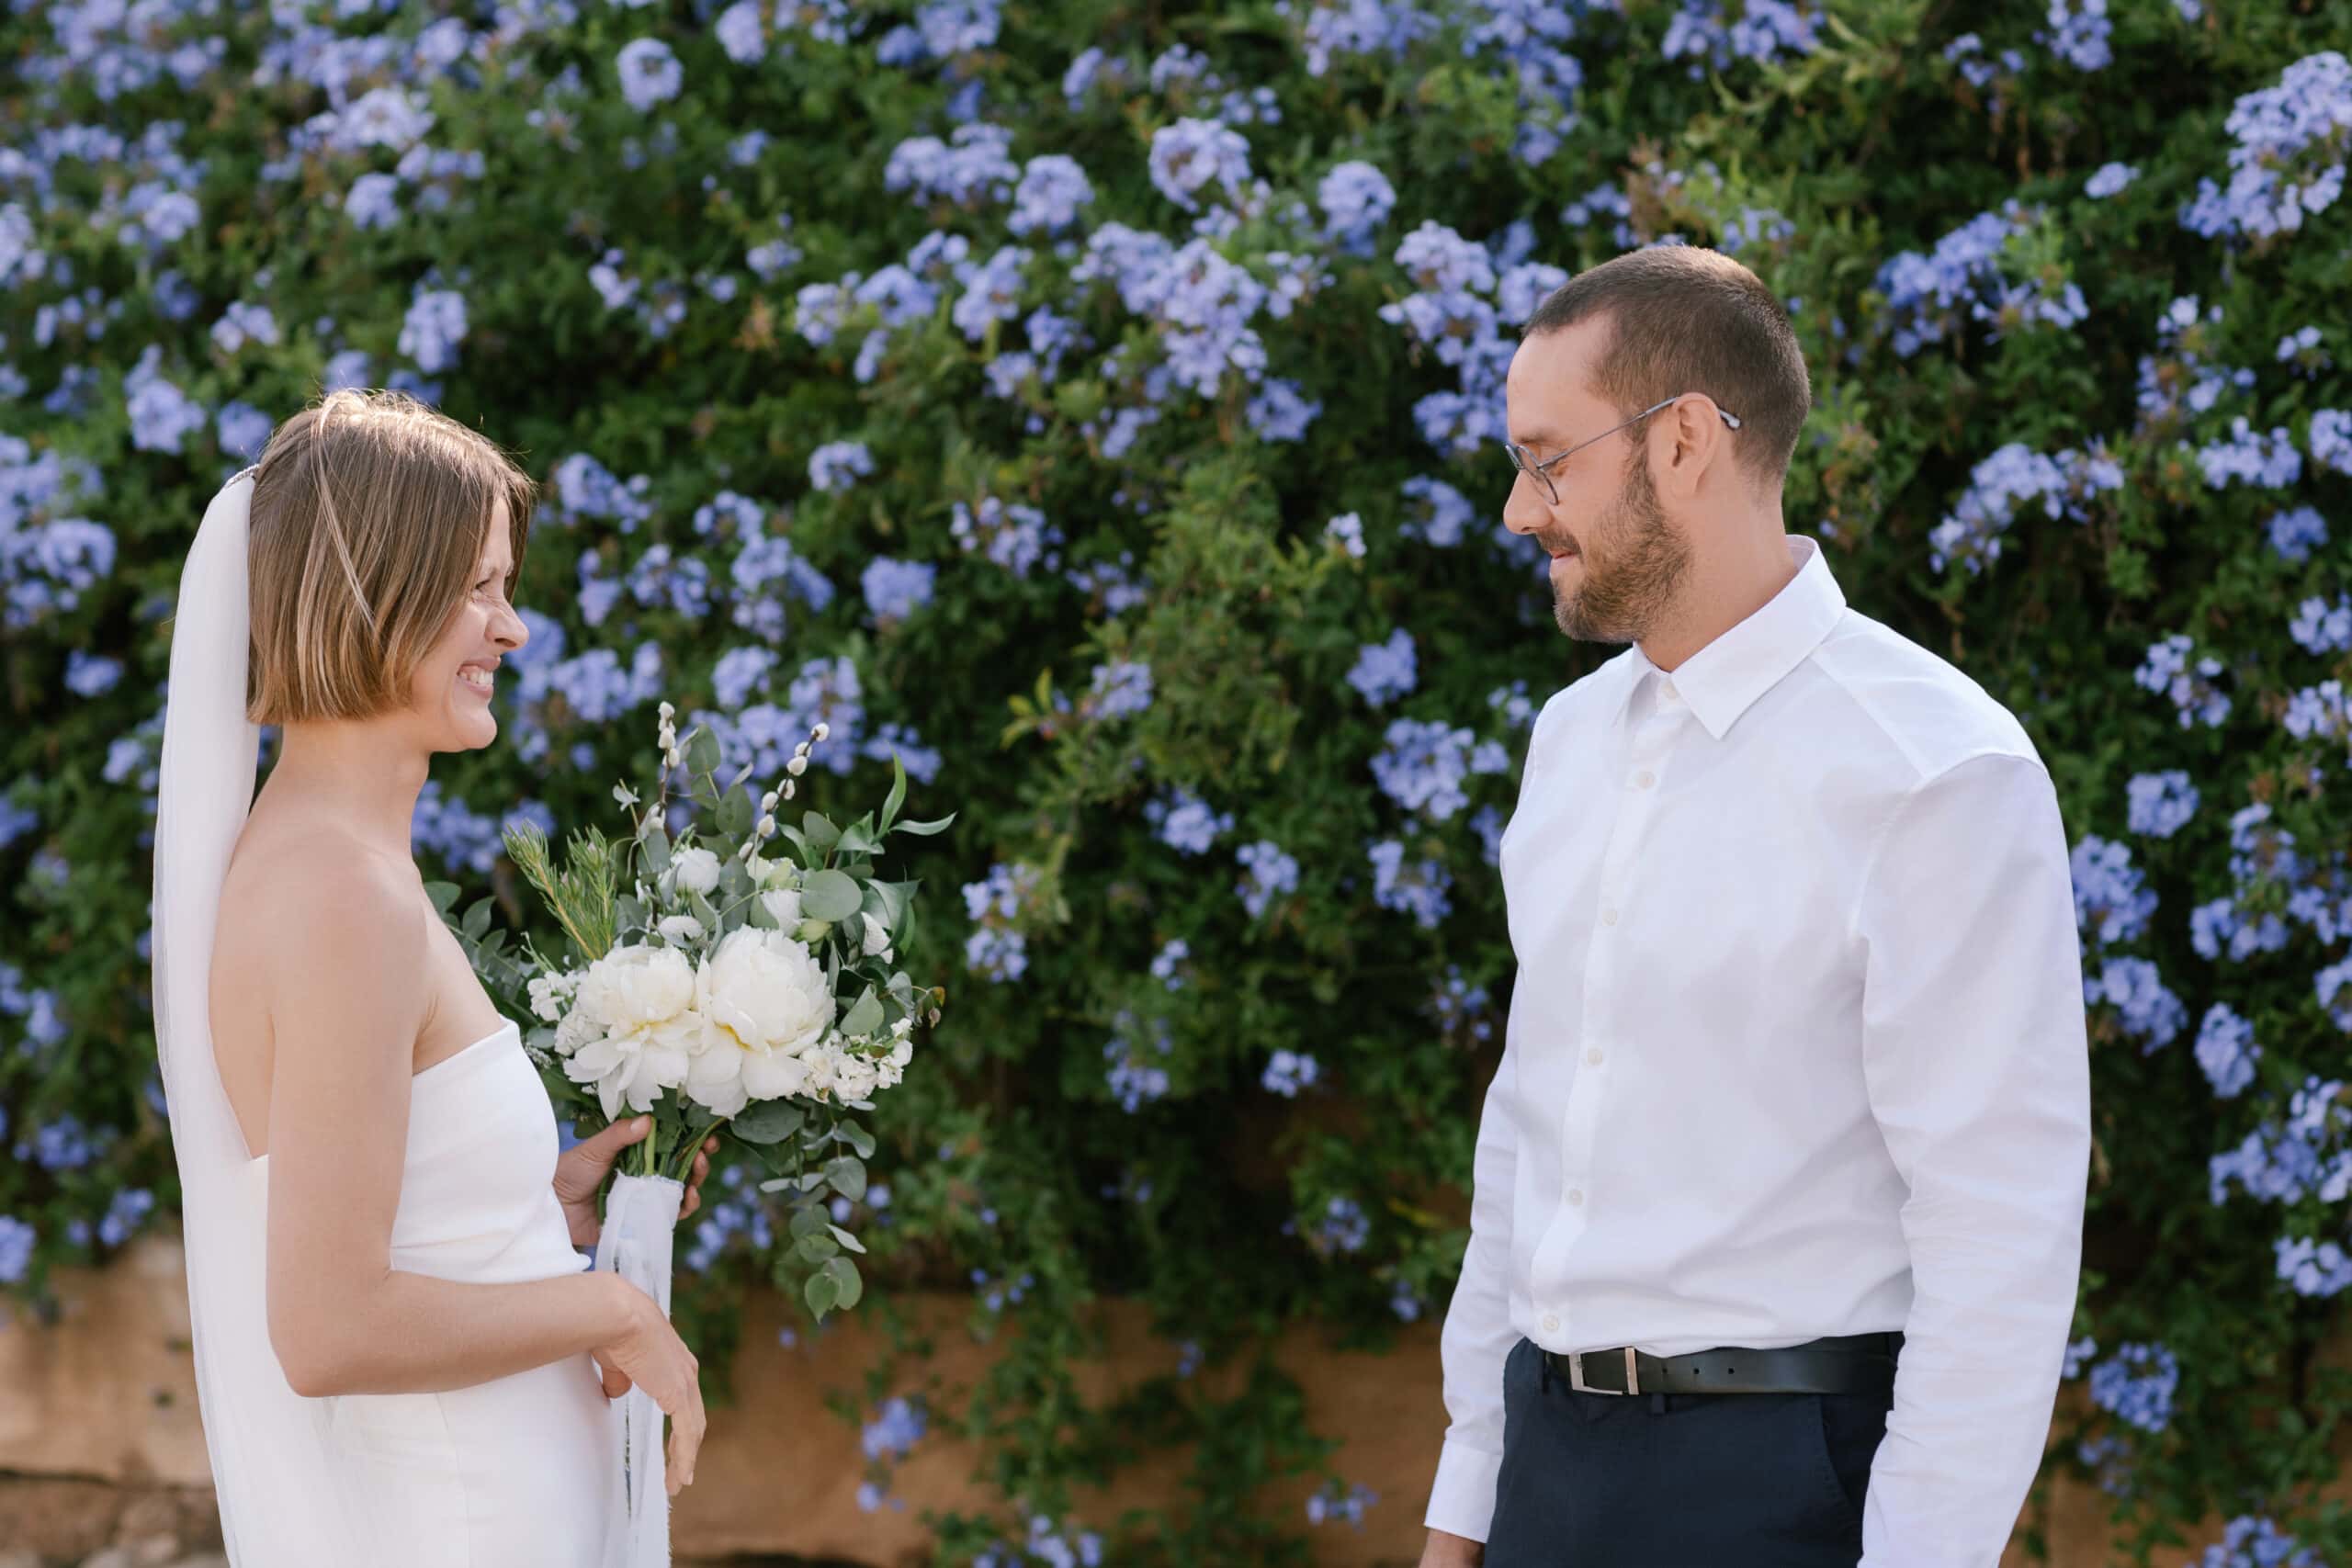 Bride and groom smiling at each other during their First Look in an Algarve garden with blue flowers